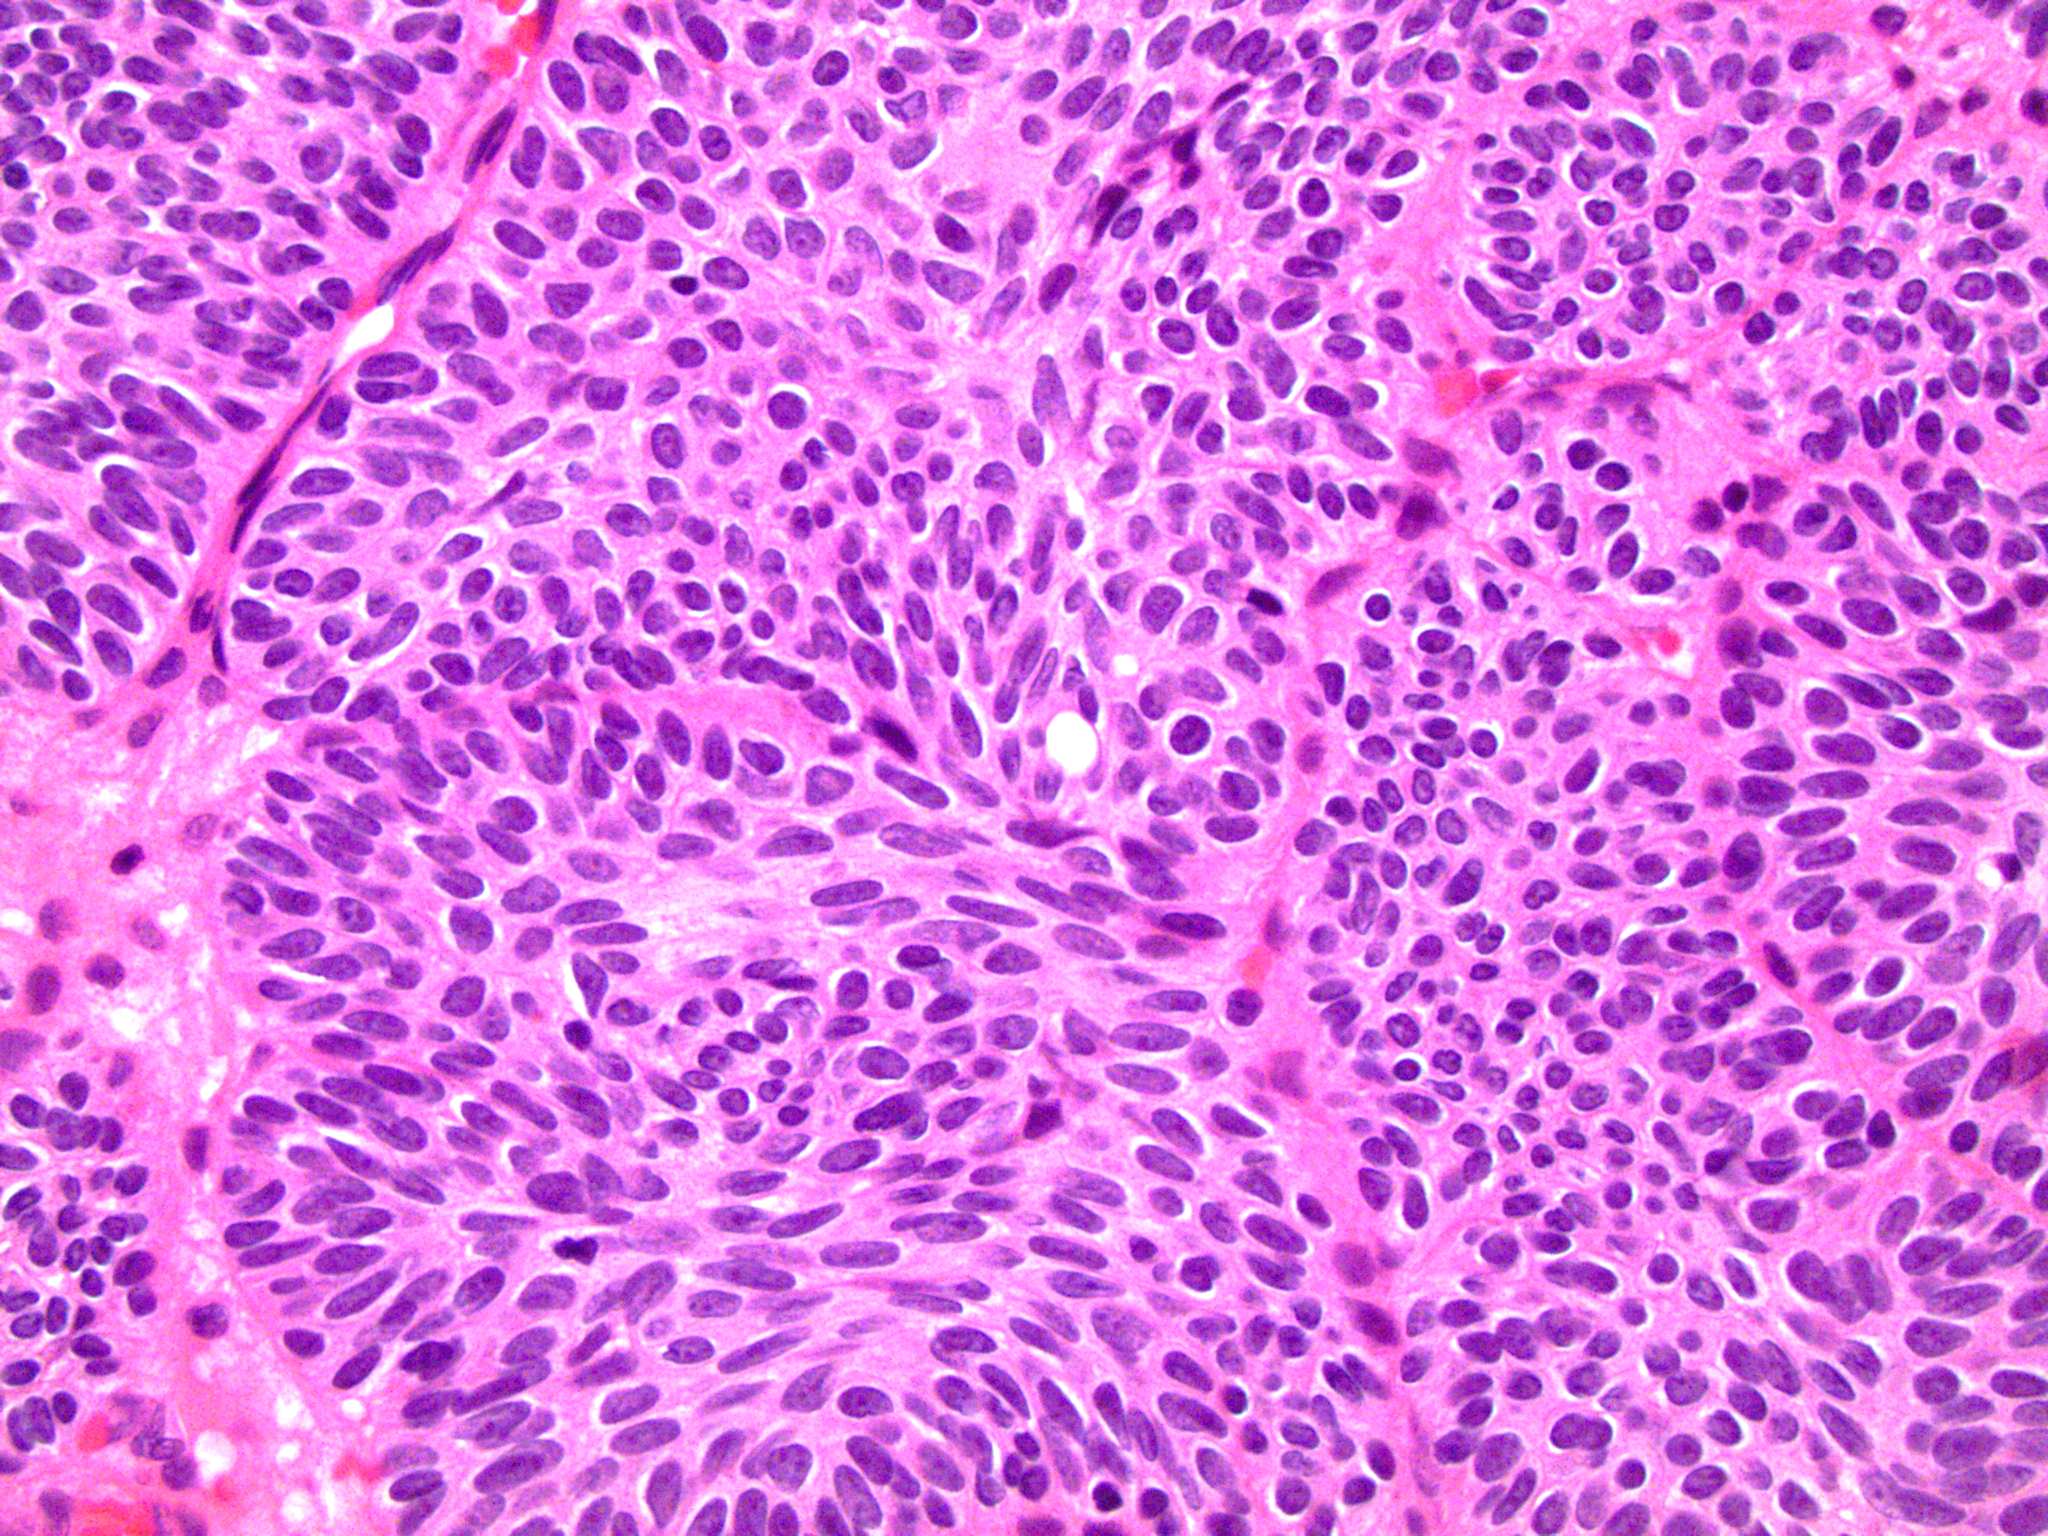 inverted papilloma urothelial